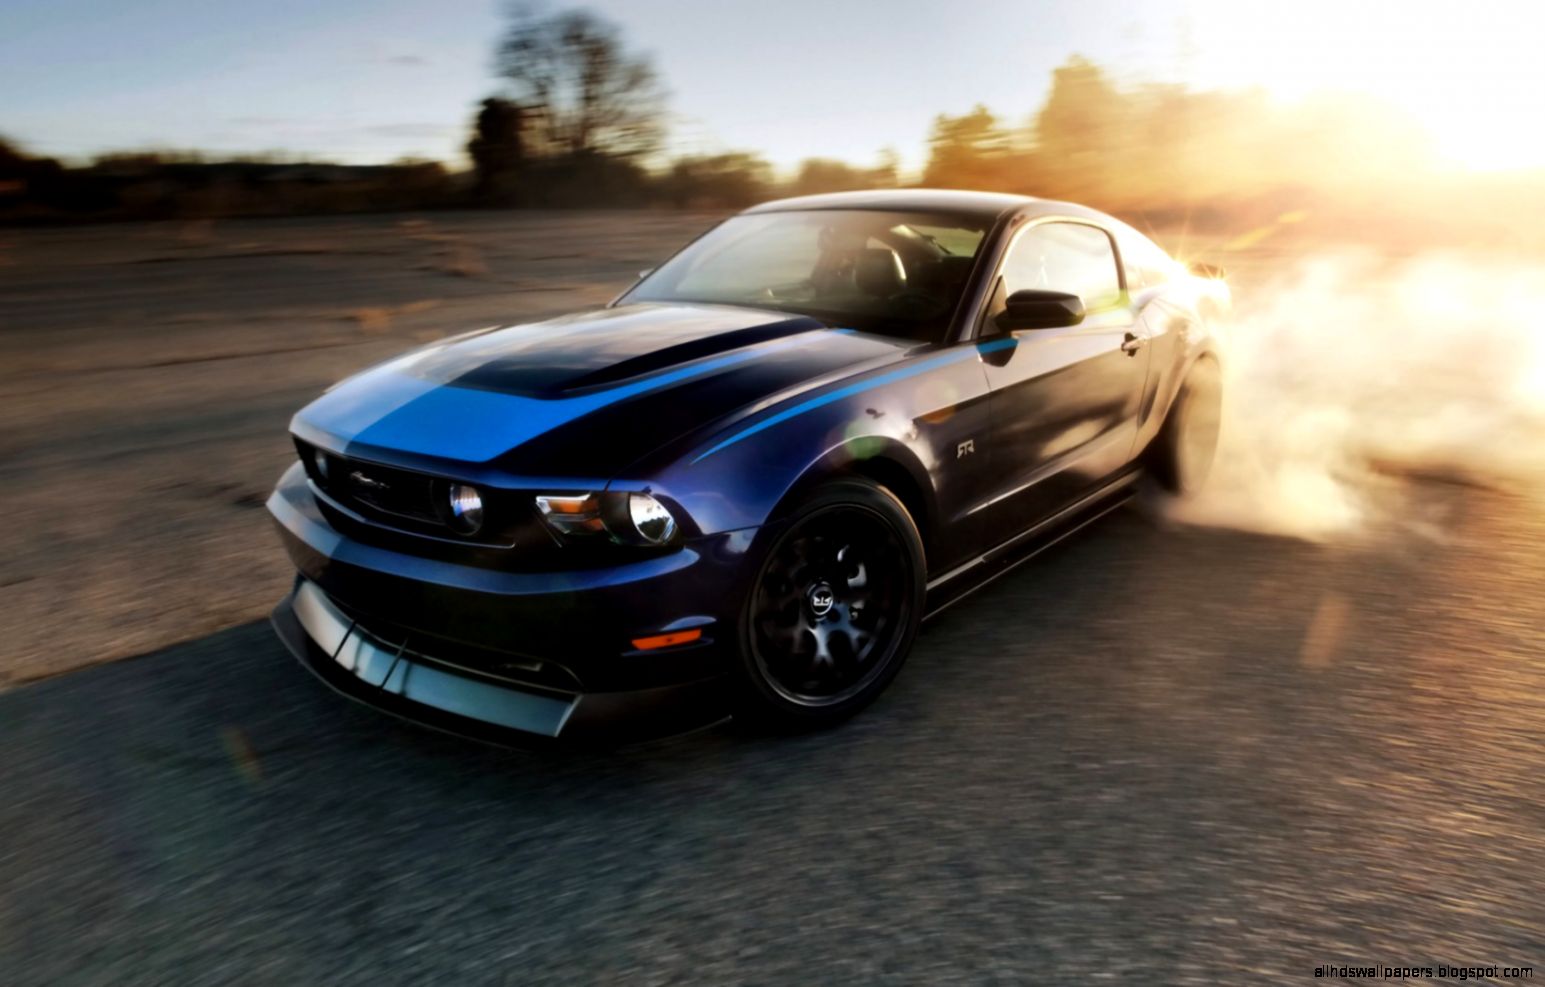 Ford Mustang Cars Drifting Wallpaper | All HD Wallpapers